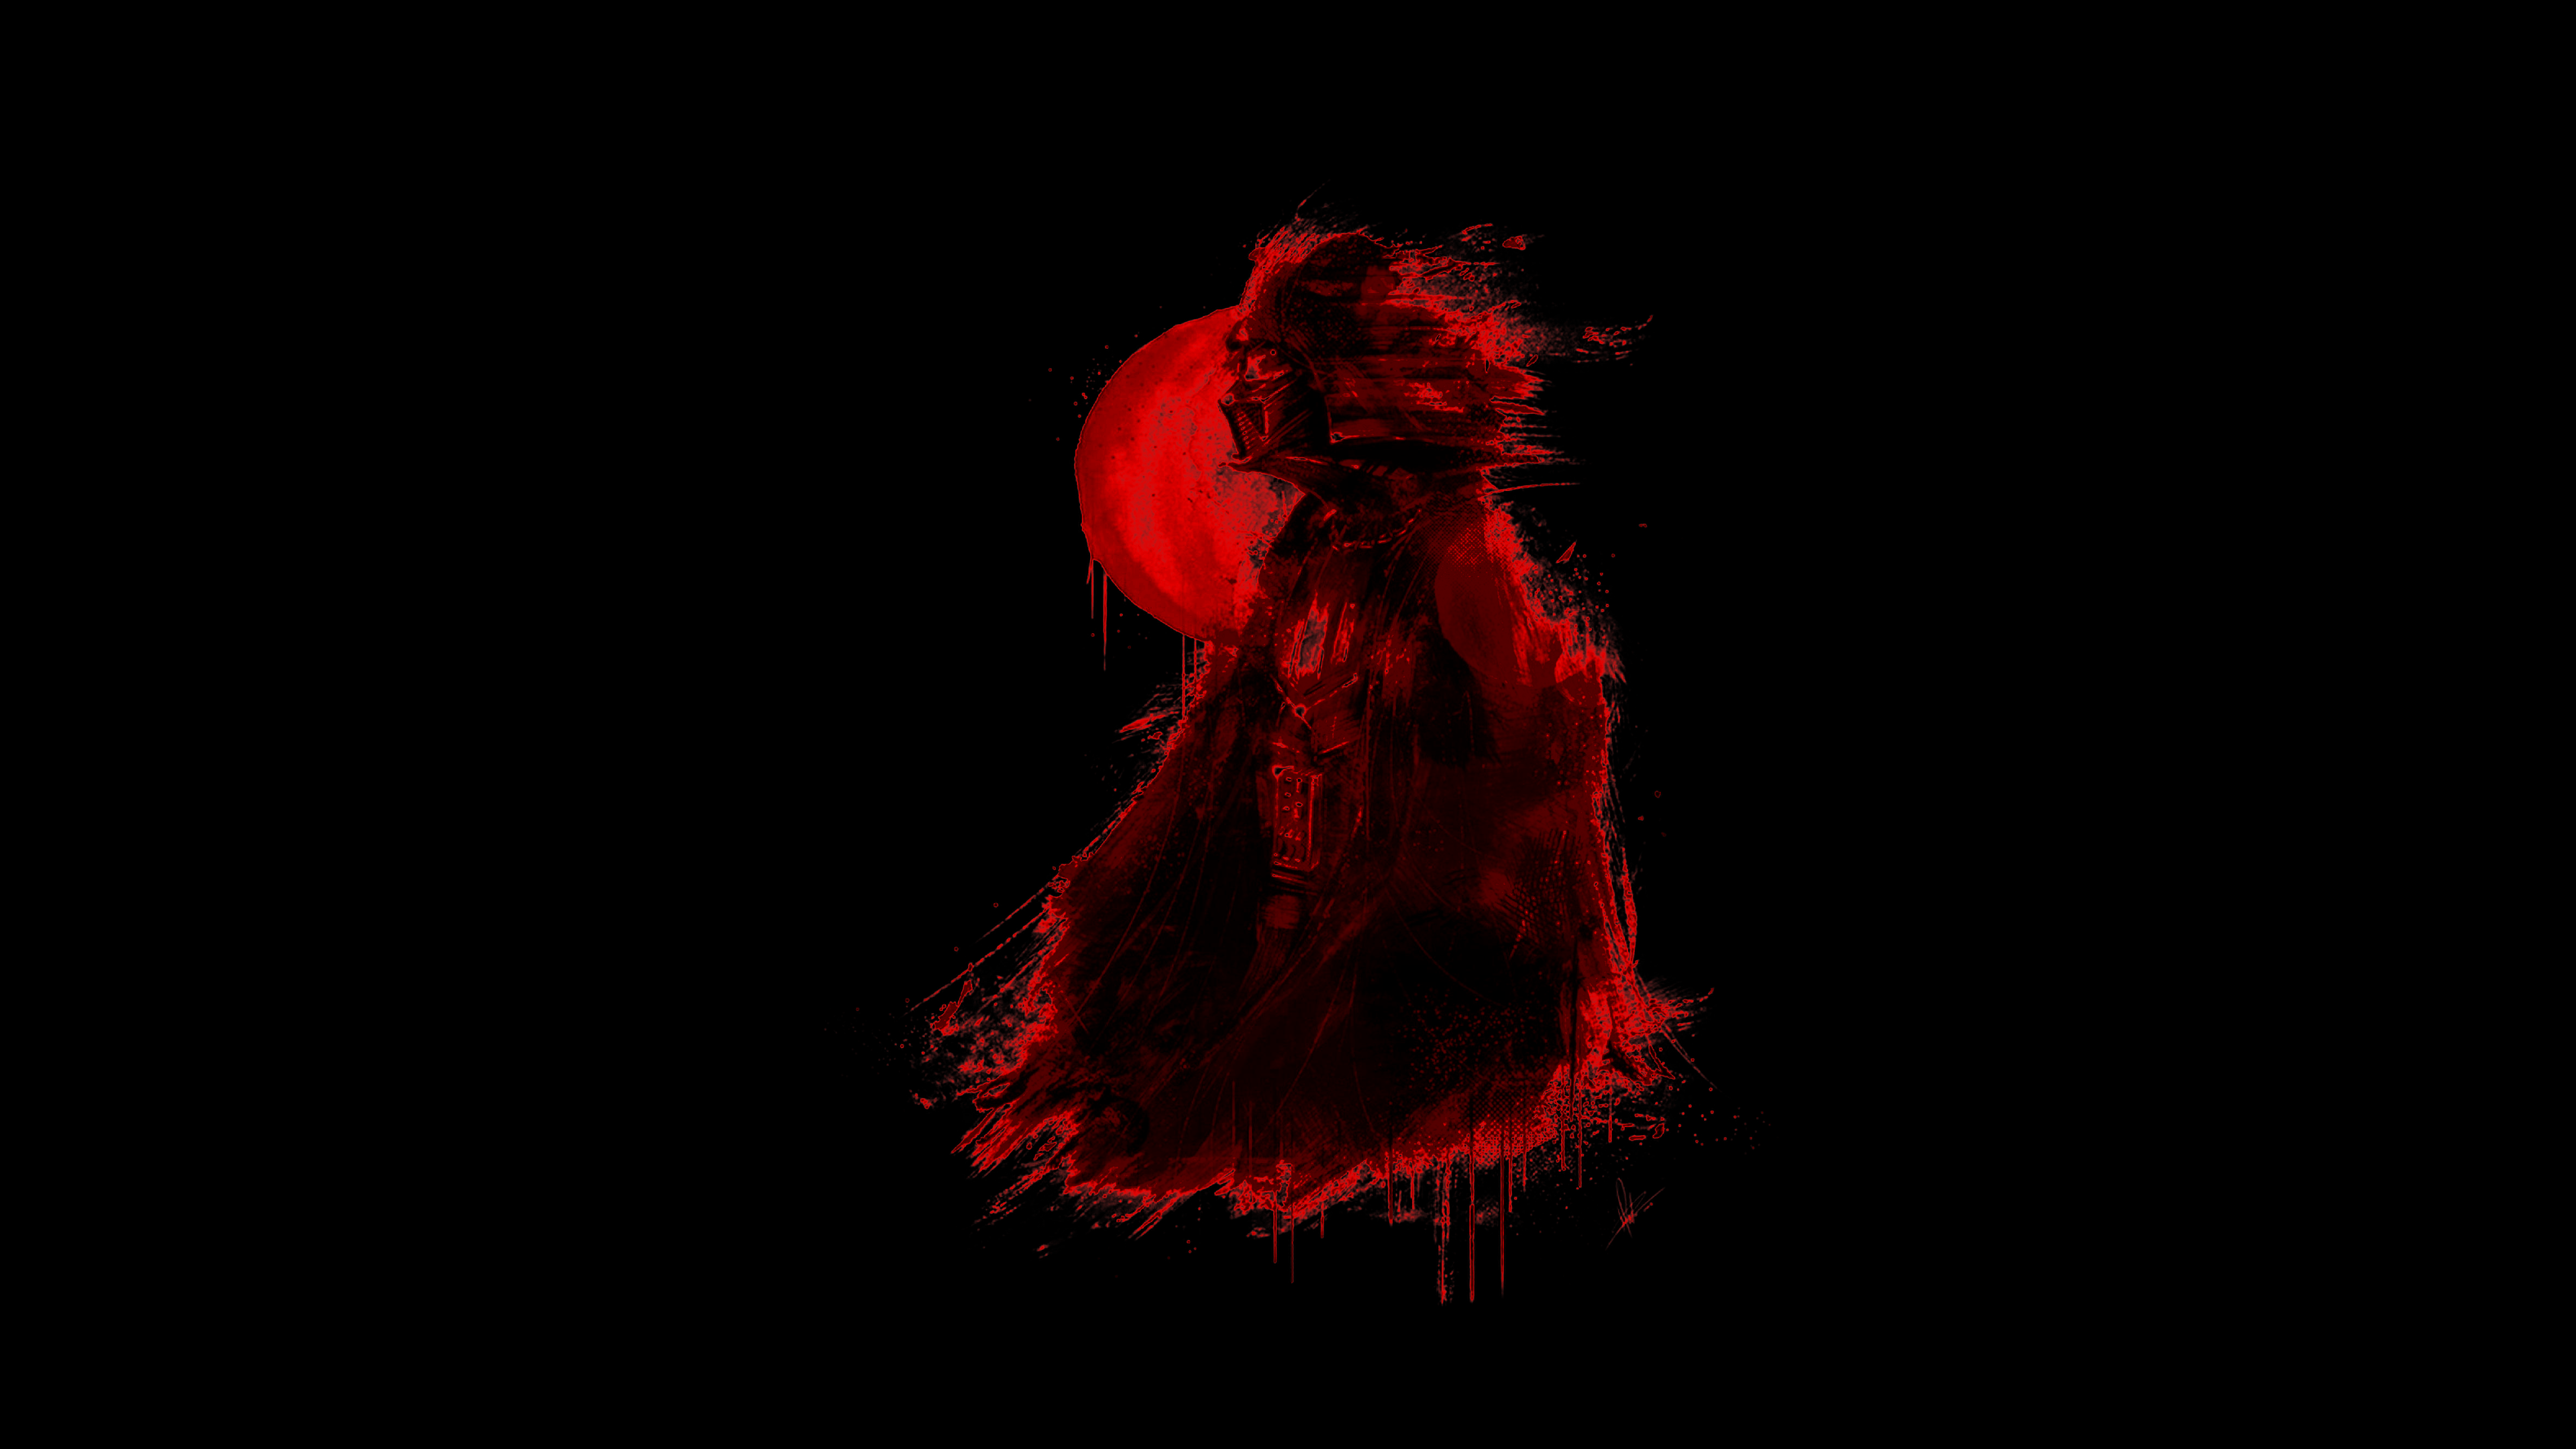 Stylized Red Vader for Black Amoled Screens [3840x2160]. Dark background wallpaper, Joker iphone wallpaper, Samsung wallpaper android